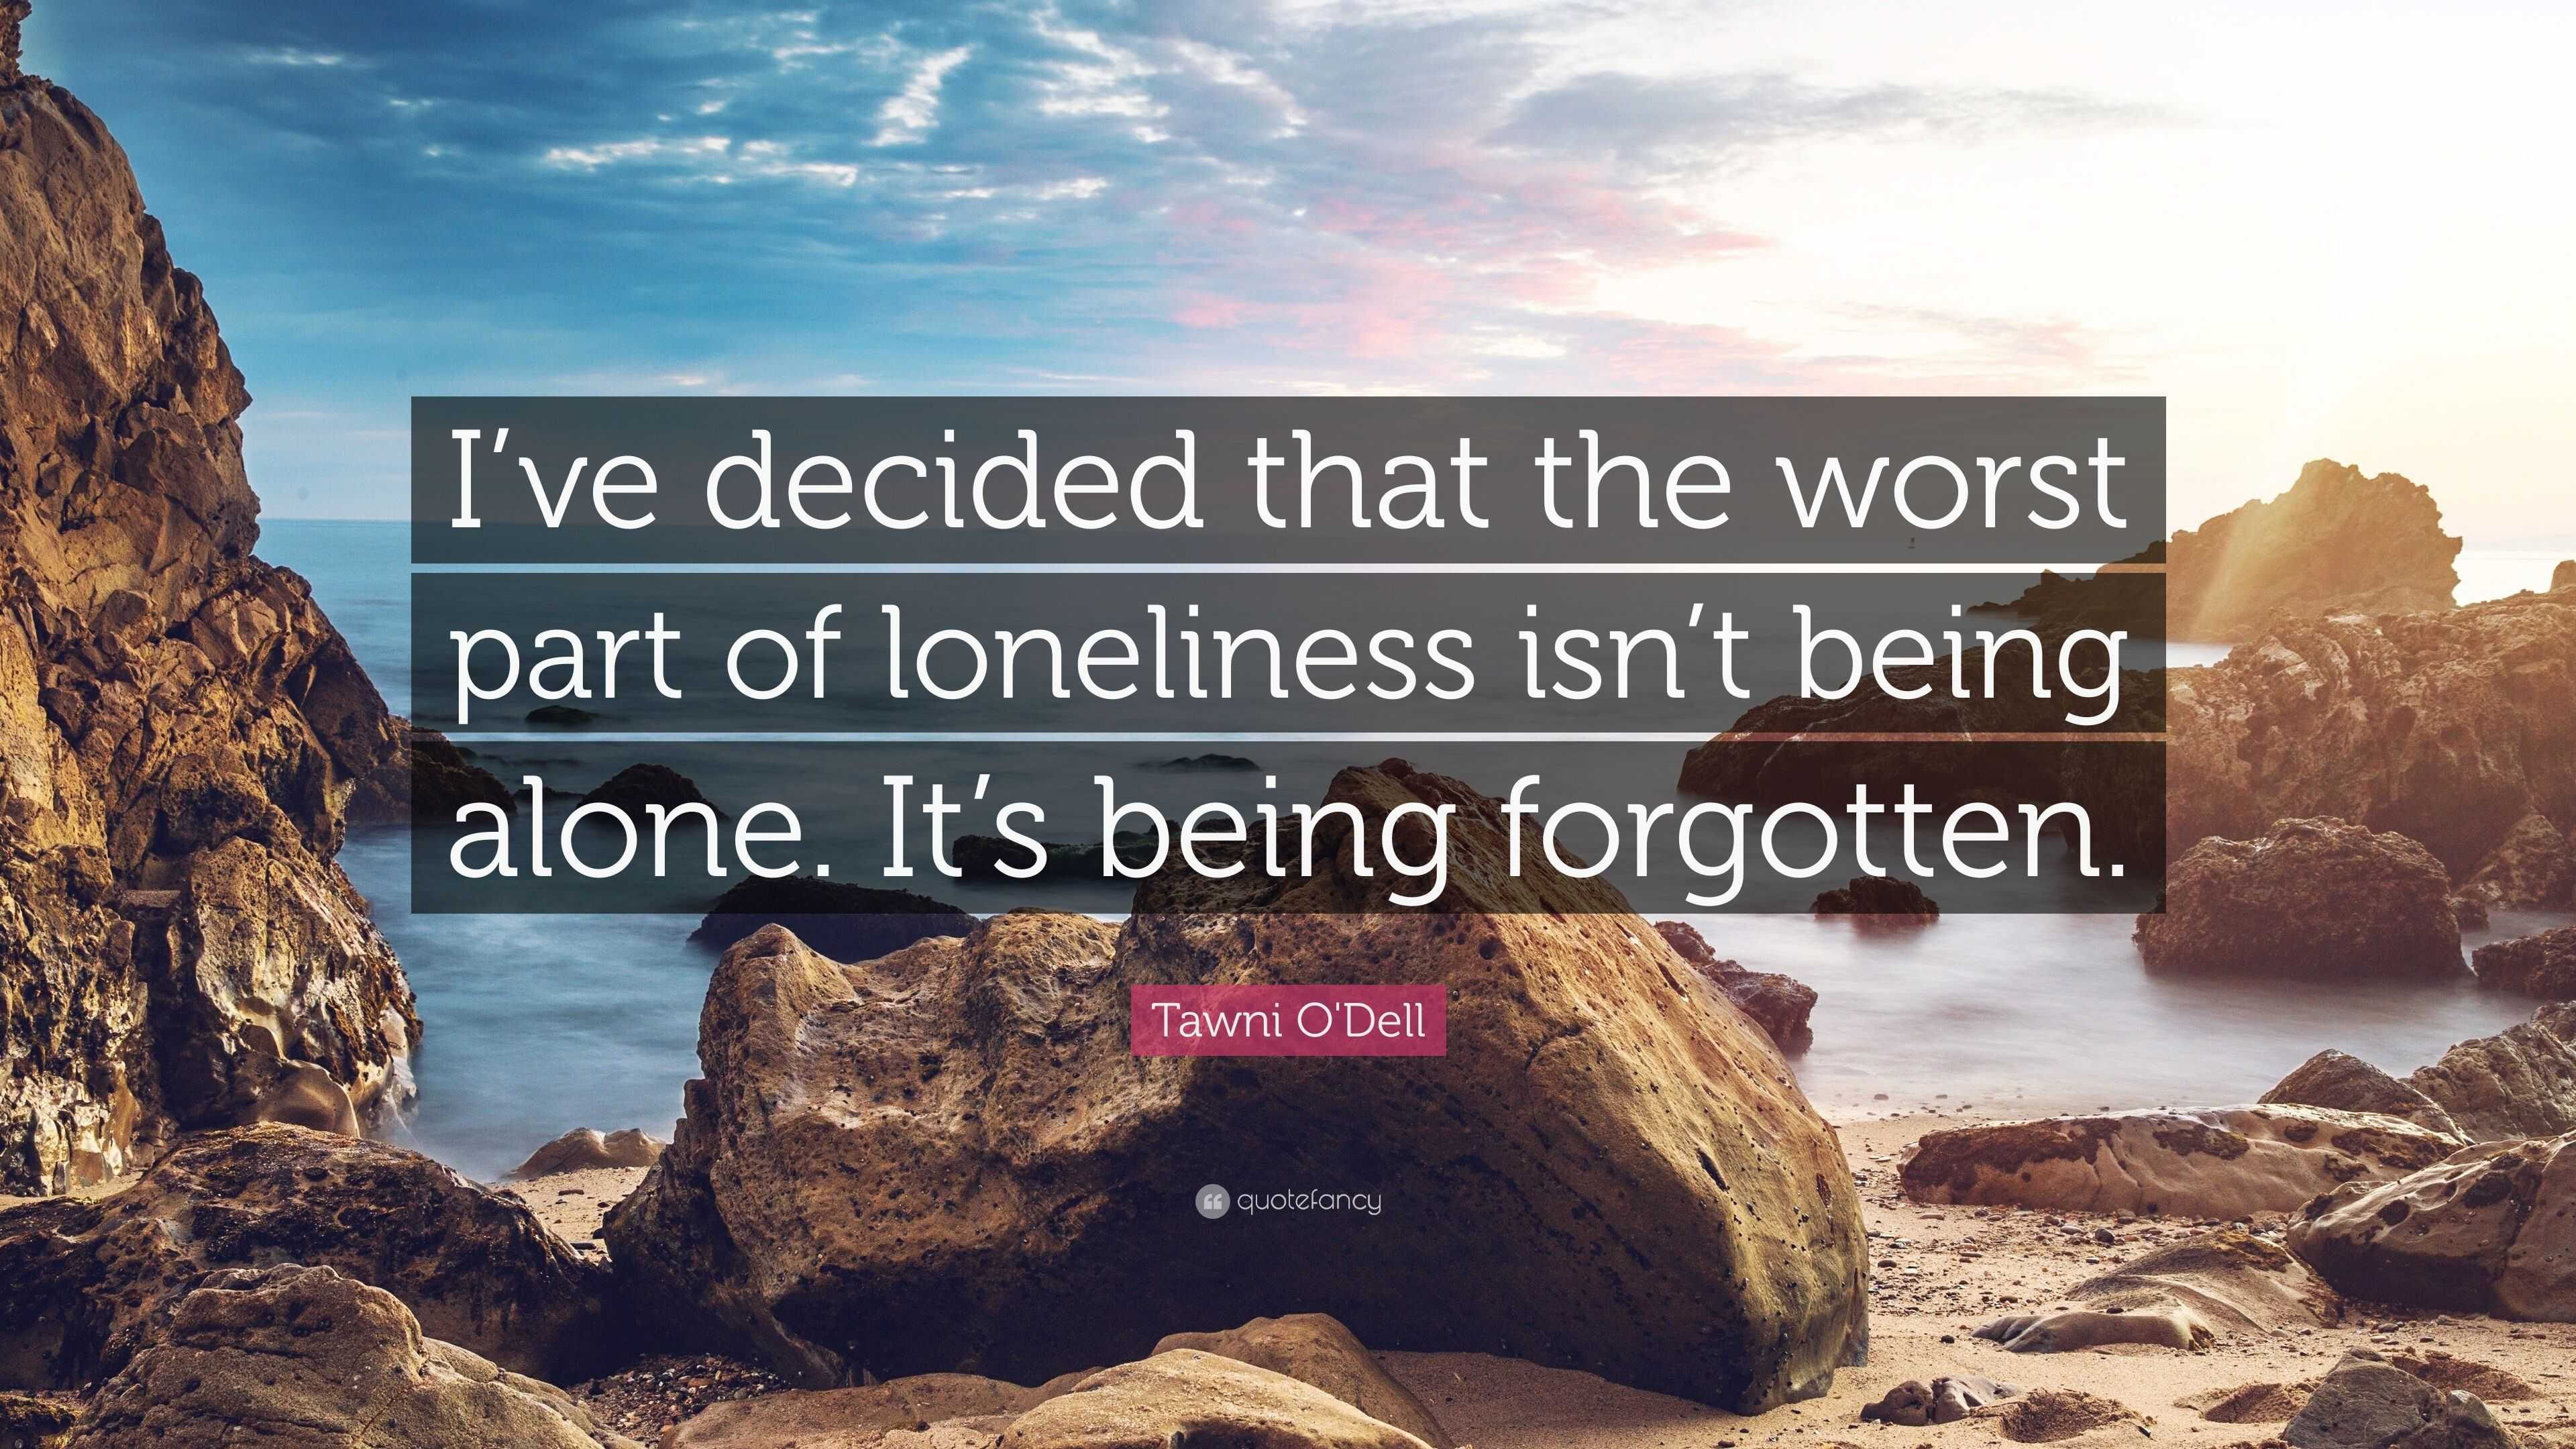 Why Being Alone Isn't Loneliness